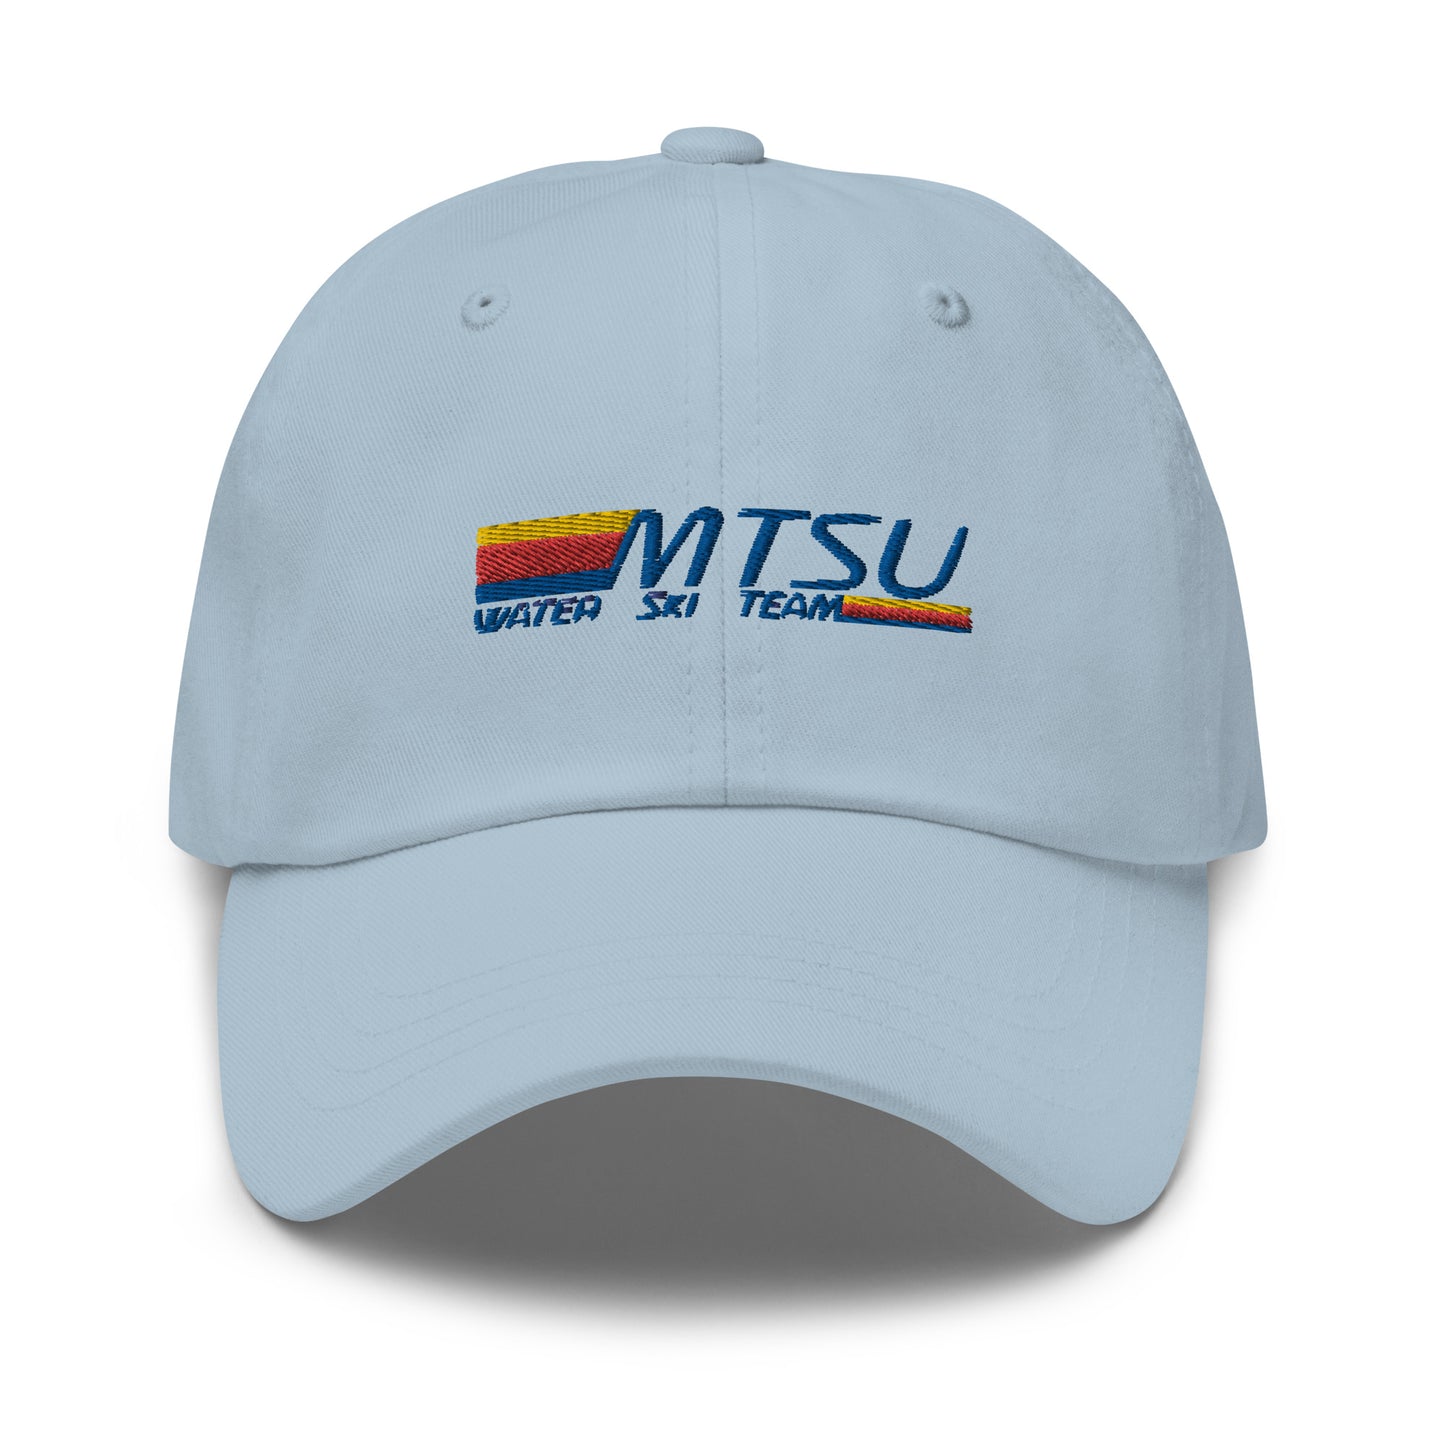 Dad hat but it's like a cool one